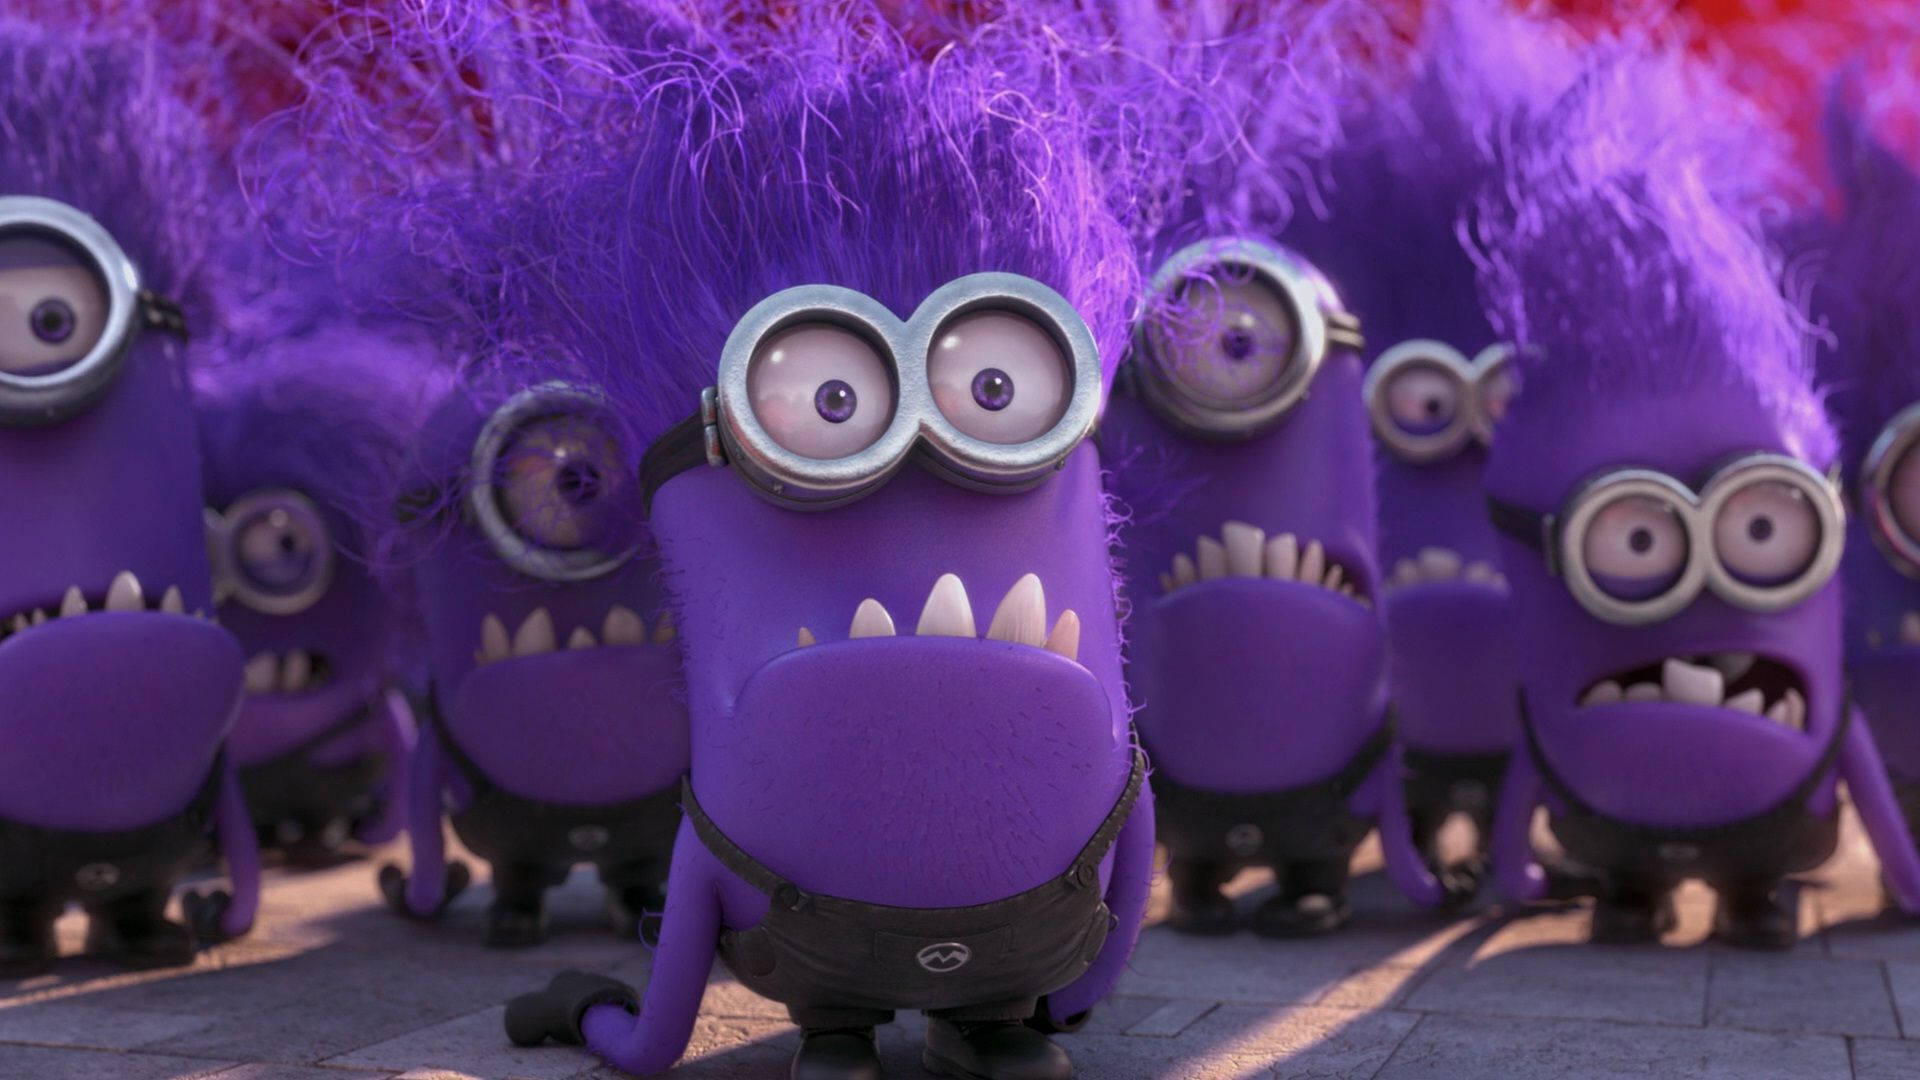 Download Group Of Evil Minion Wallpaper